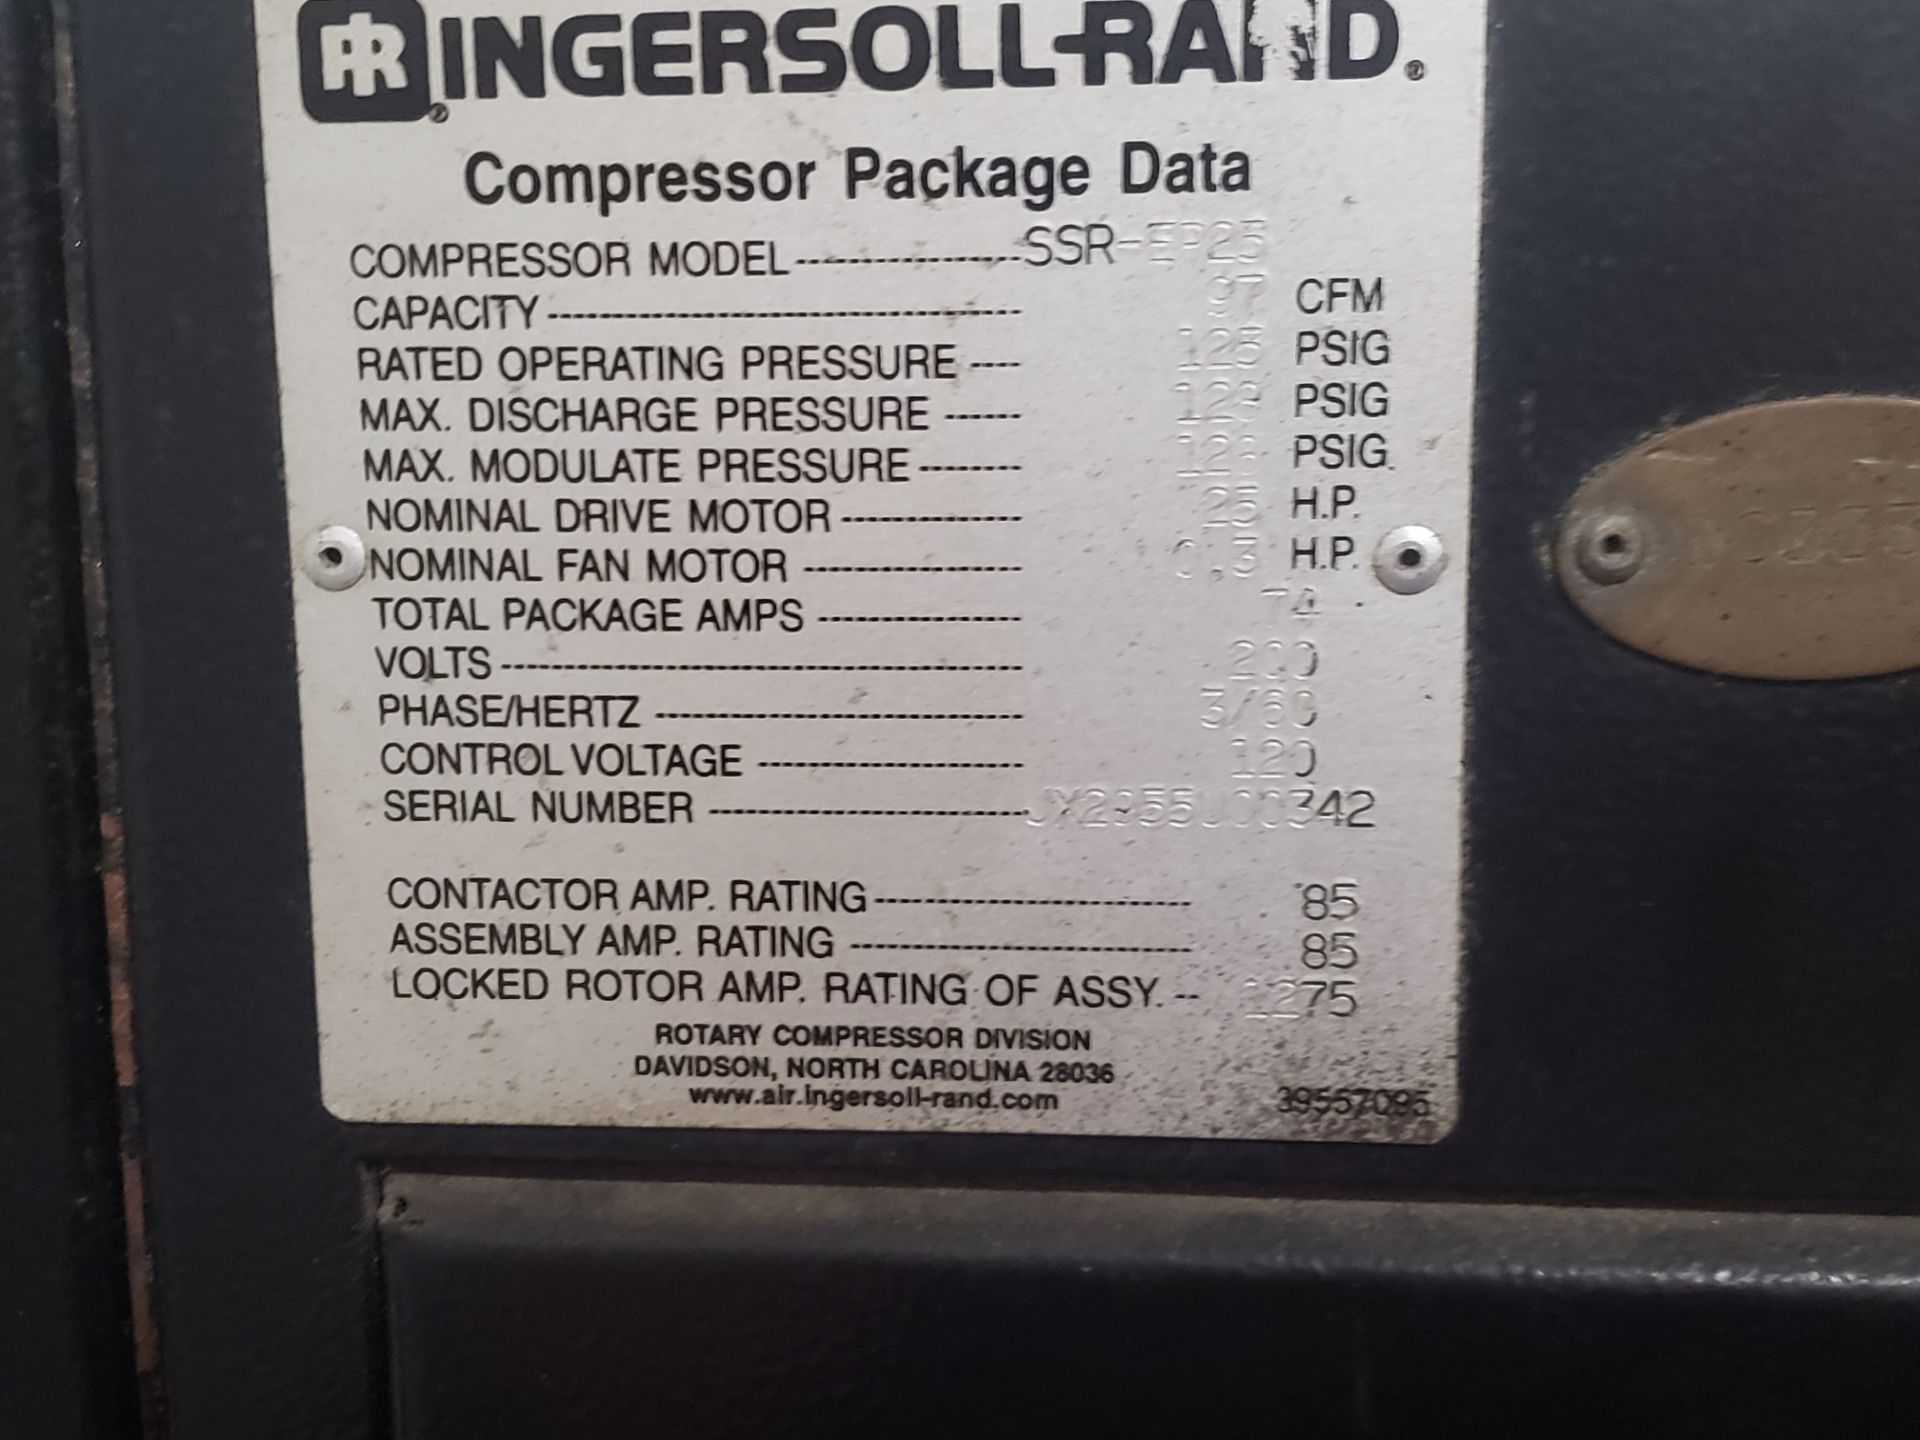 Ingersoll-Rand modle SSR-EP25 Air Compressor, 97 CFM, 125 psi located Worcester, MA - Image 3 of 8